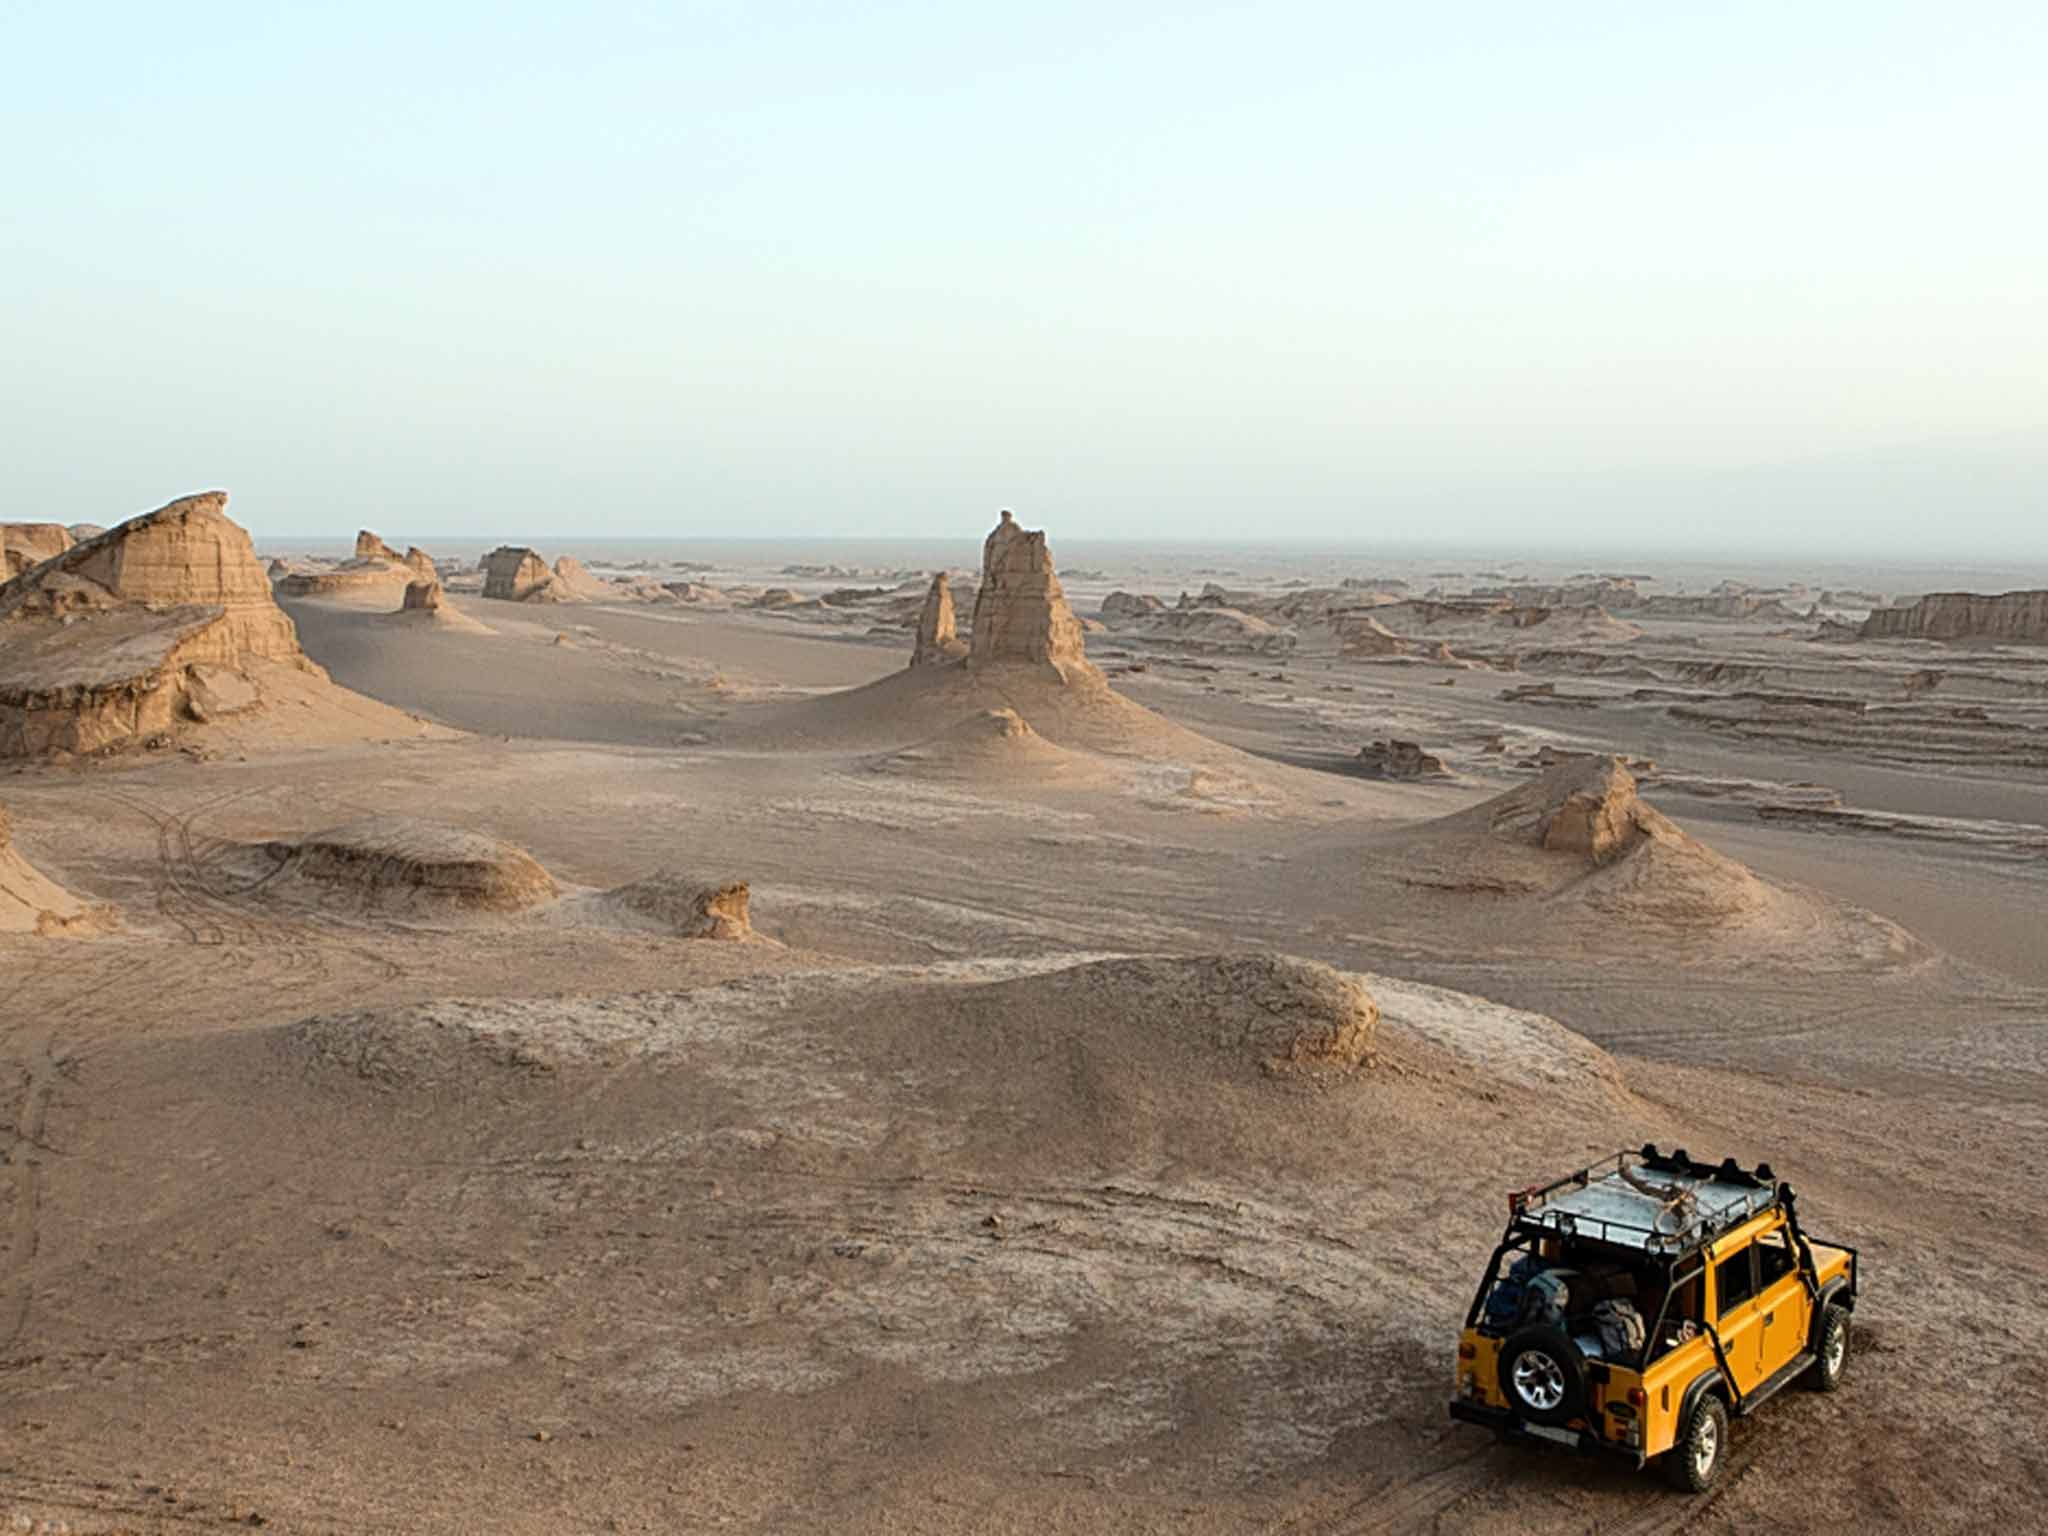 Sense of adventure: try stepping out of your comfort zone into the Iranian desert